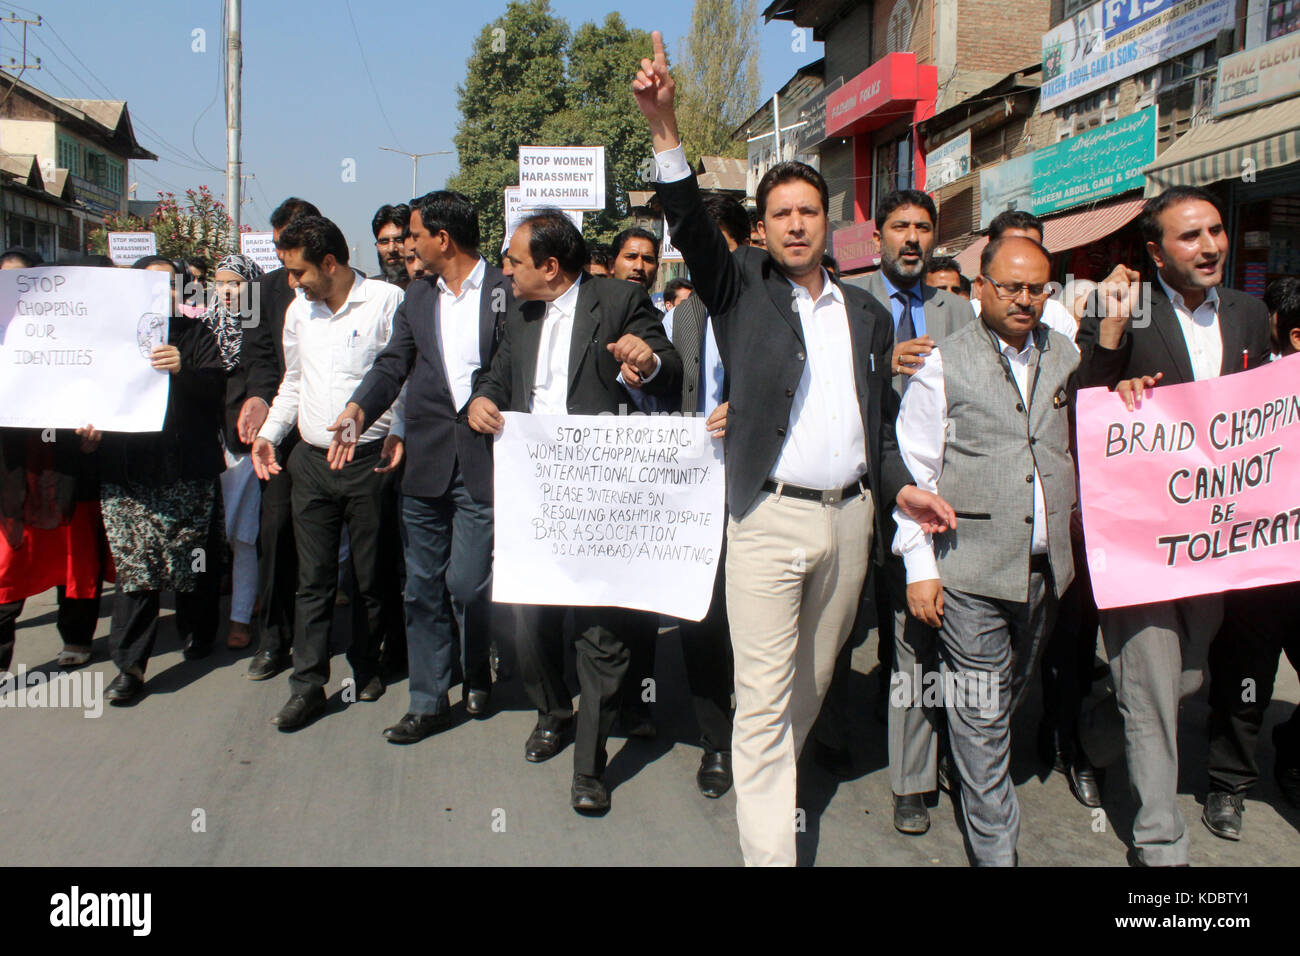 Anantnag, India. 12th Oct, 2017. Lawyers marches in protest against braid chopping in Anantnag. Credit: Muneeb Ul Islam/Pacific Press/Alamy Live News Stock Photo